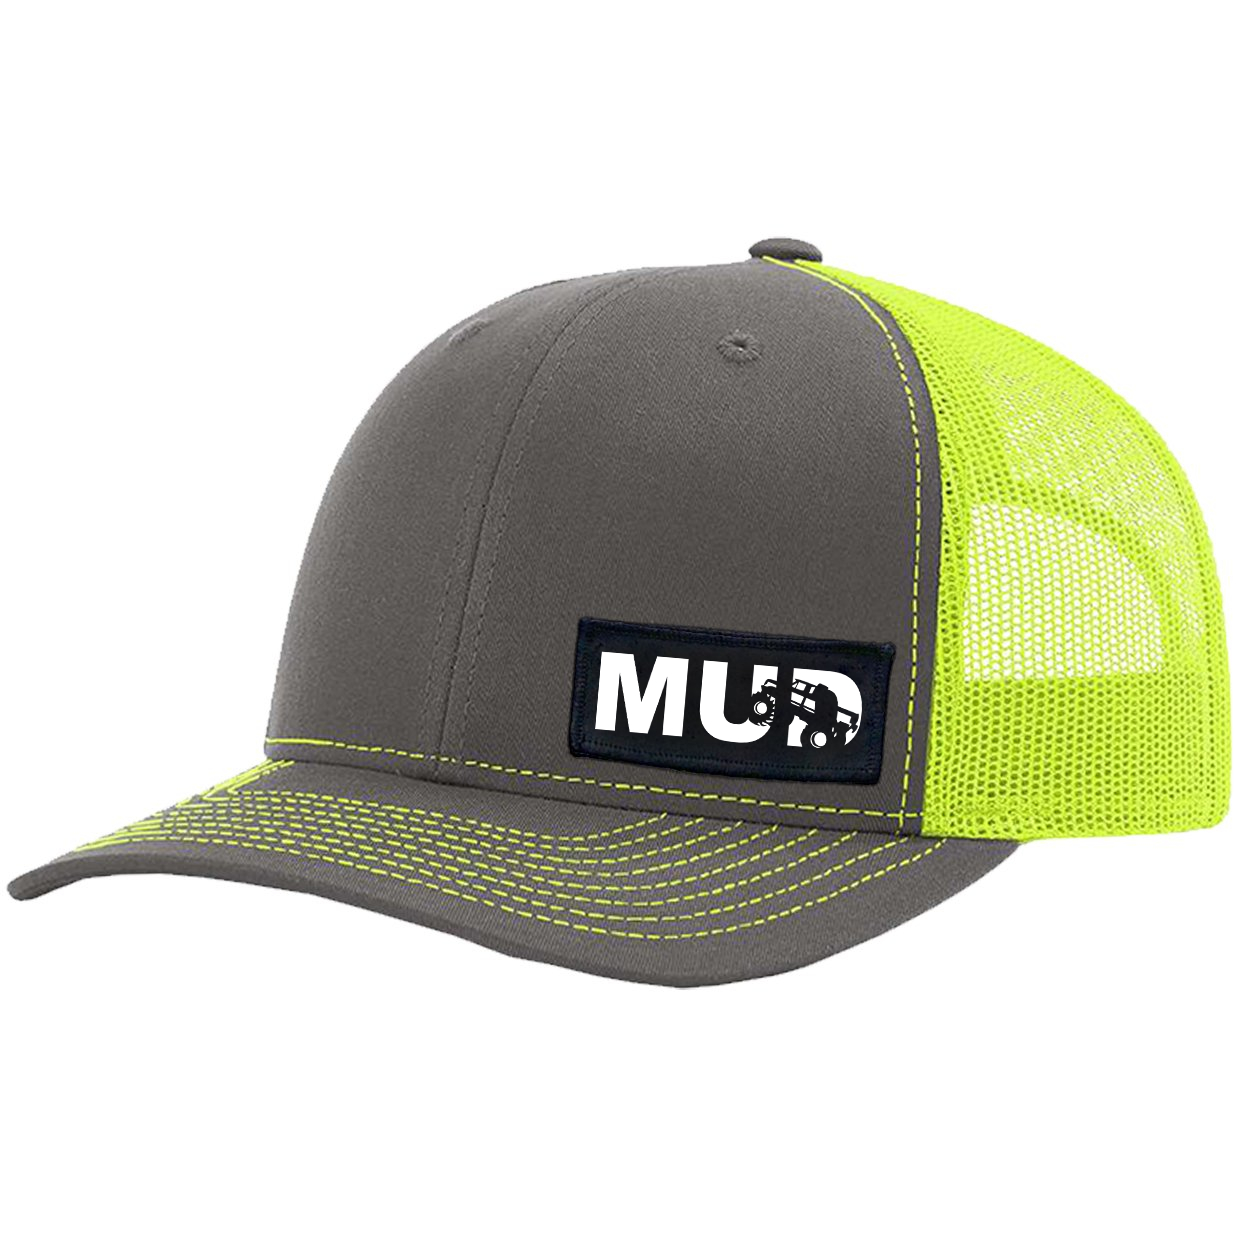 Mud Truck Logo Night Out Woven Patch Snapback Trucker Hat Charcoal/Neon Yellow (White Logo)